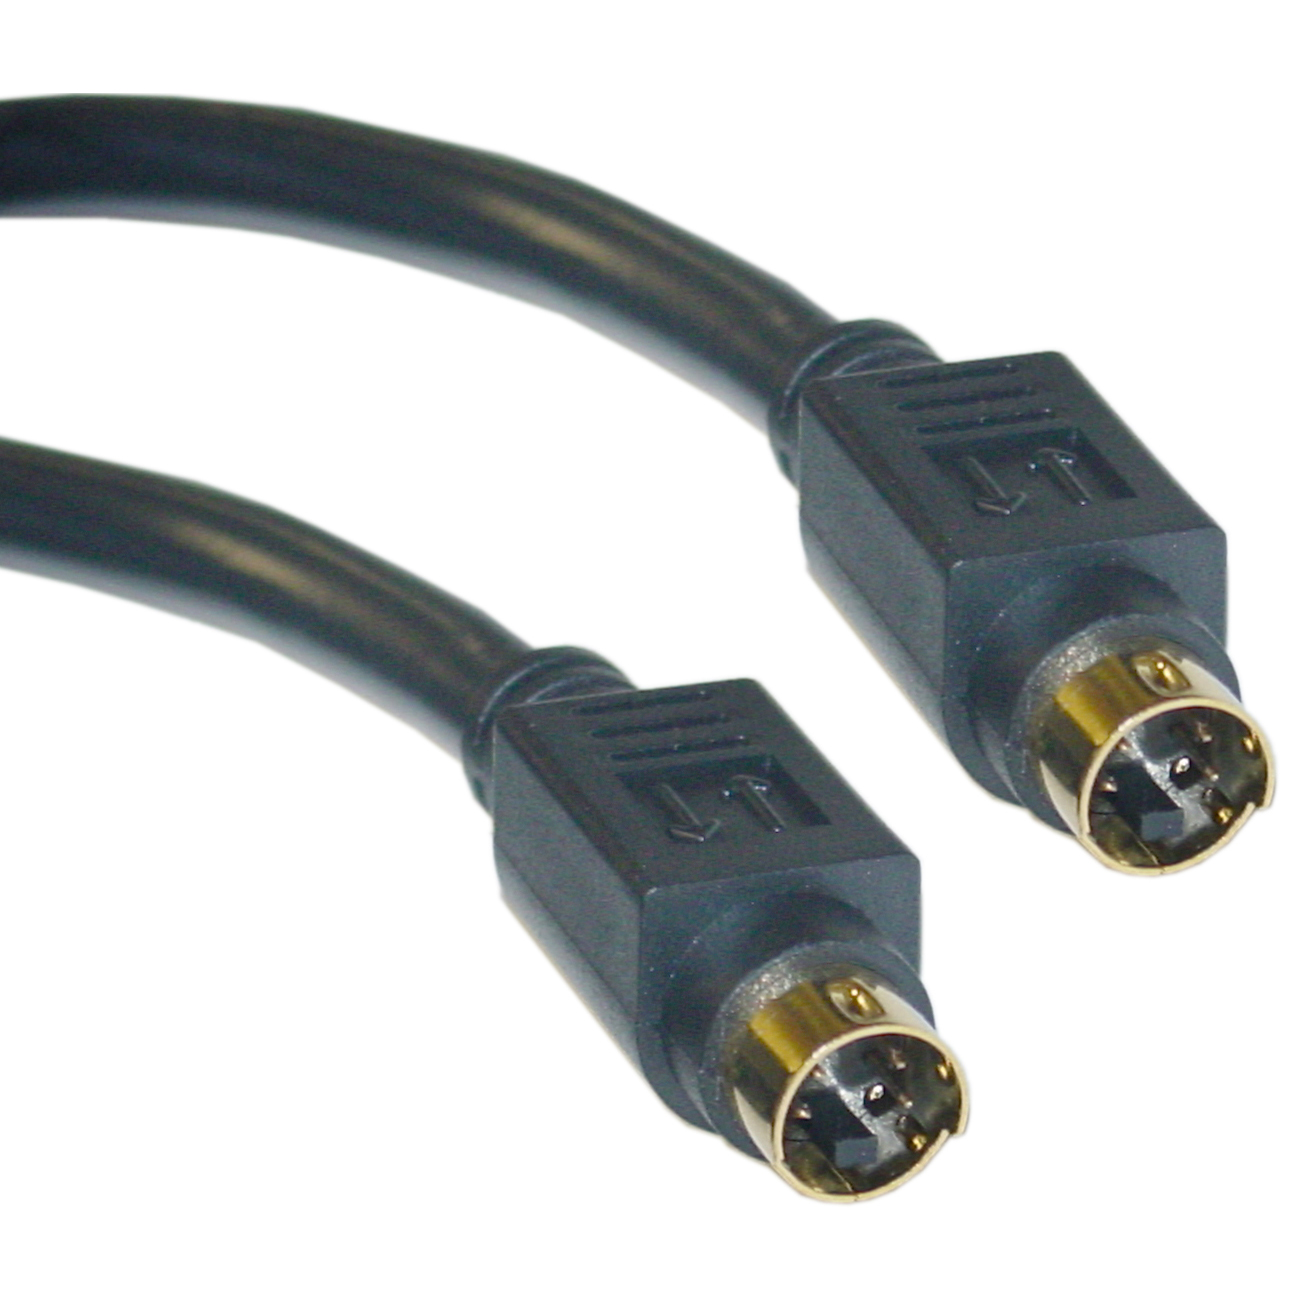 S Video Cable for Samsung SCD-23 Camcorder 6-foot. 